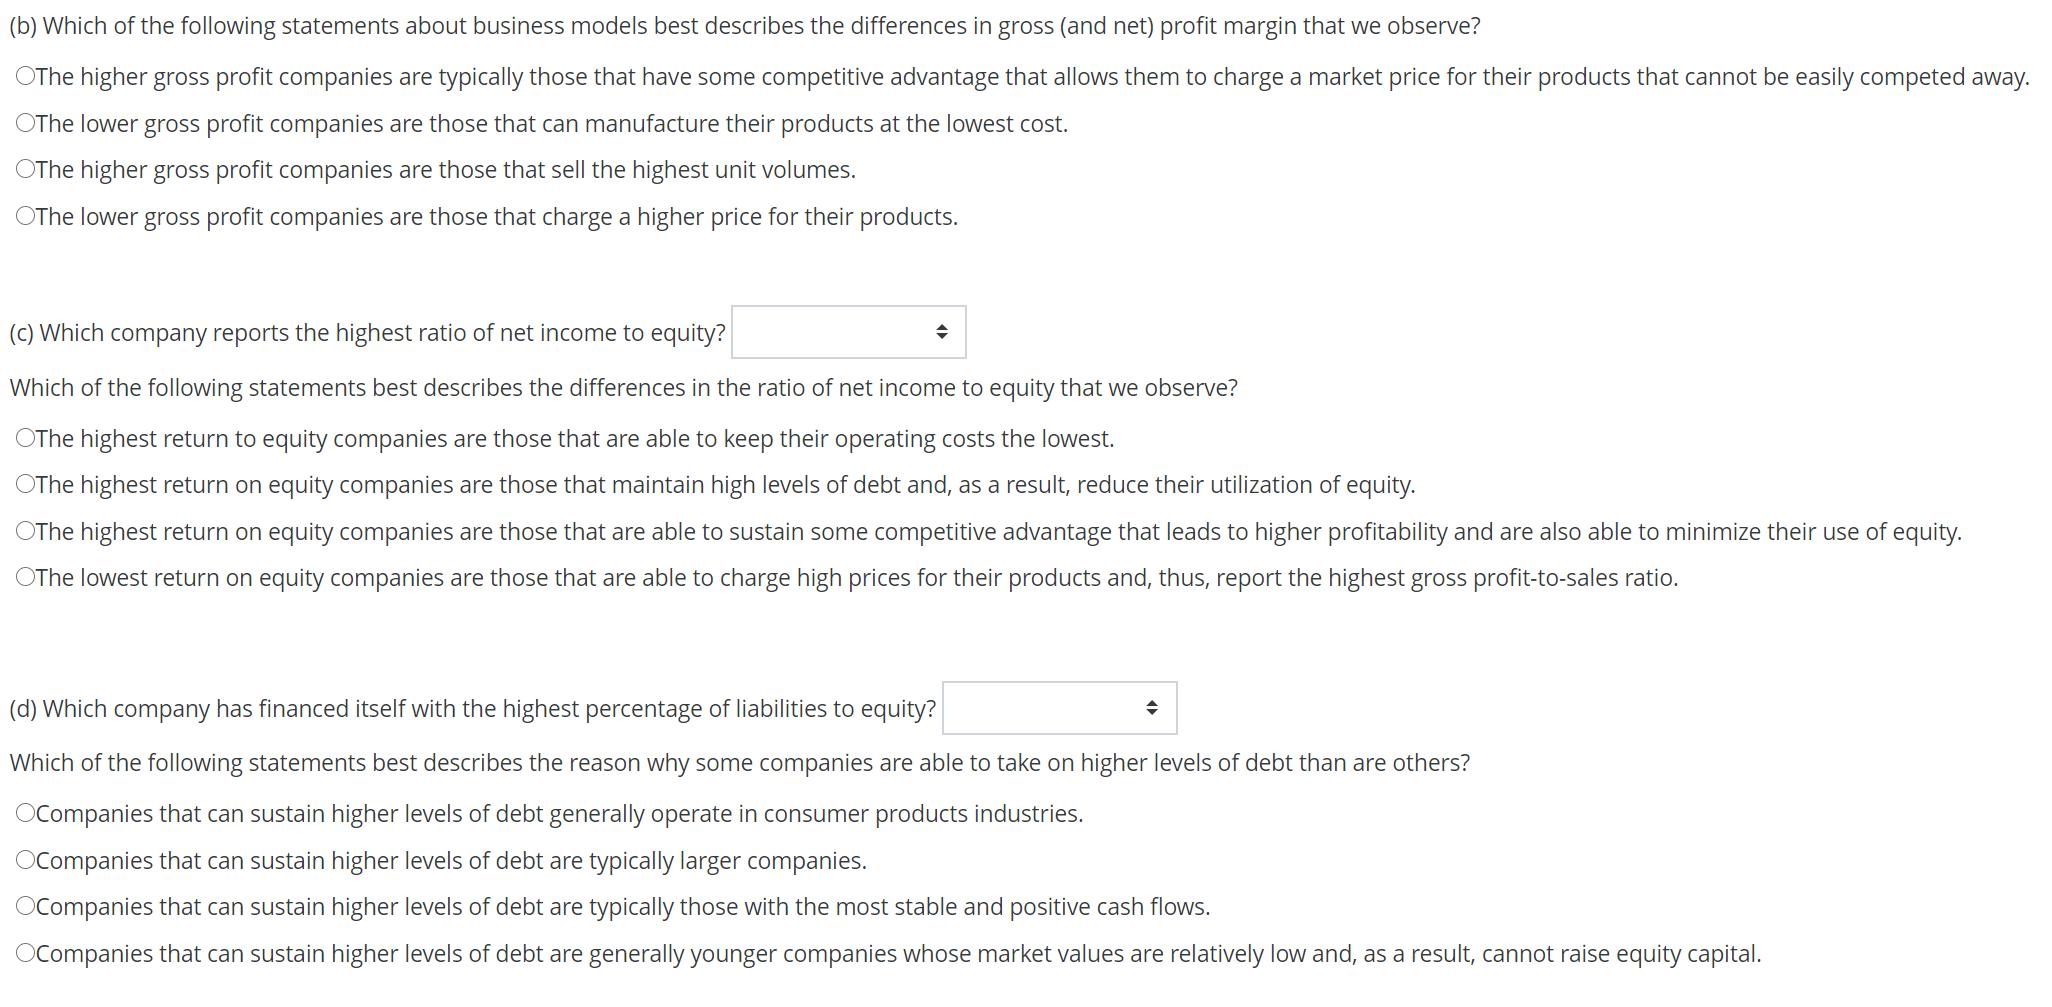 (b) Which of the following statements about business models best describes the differences in gross (and net) profit margin t